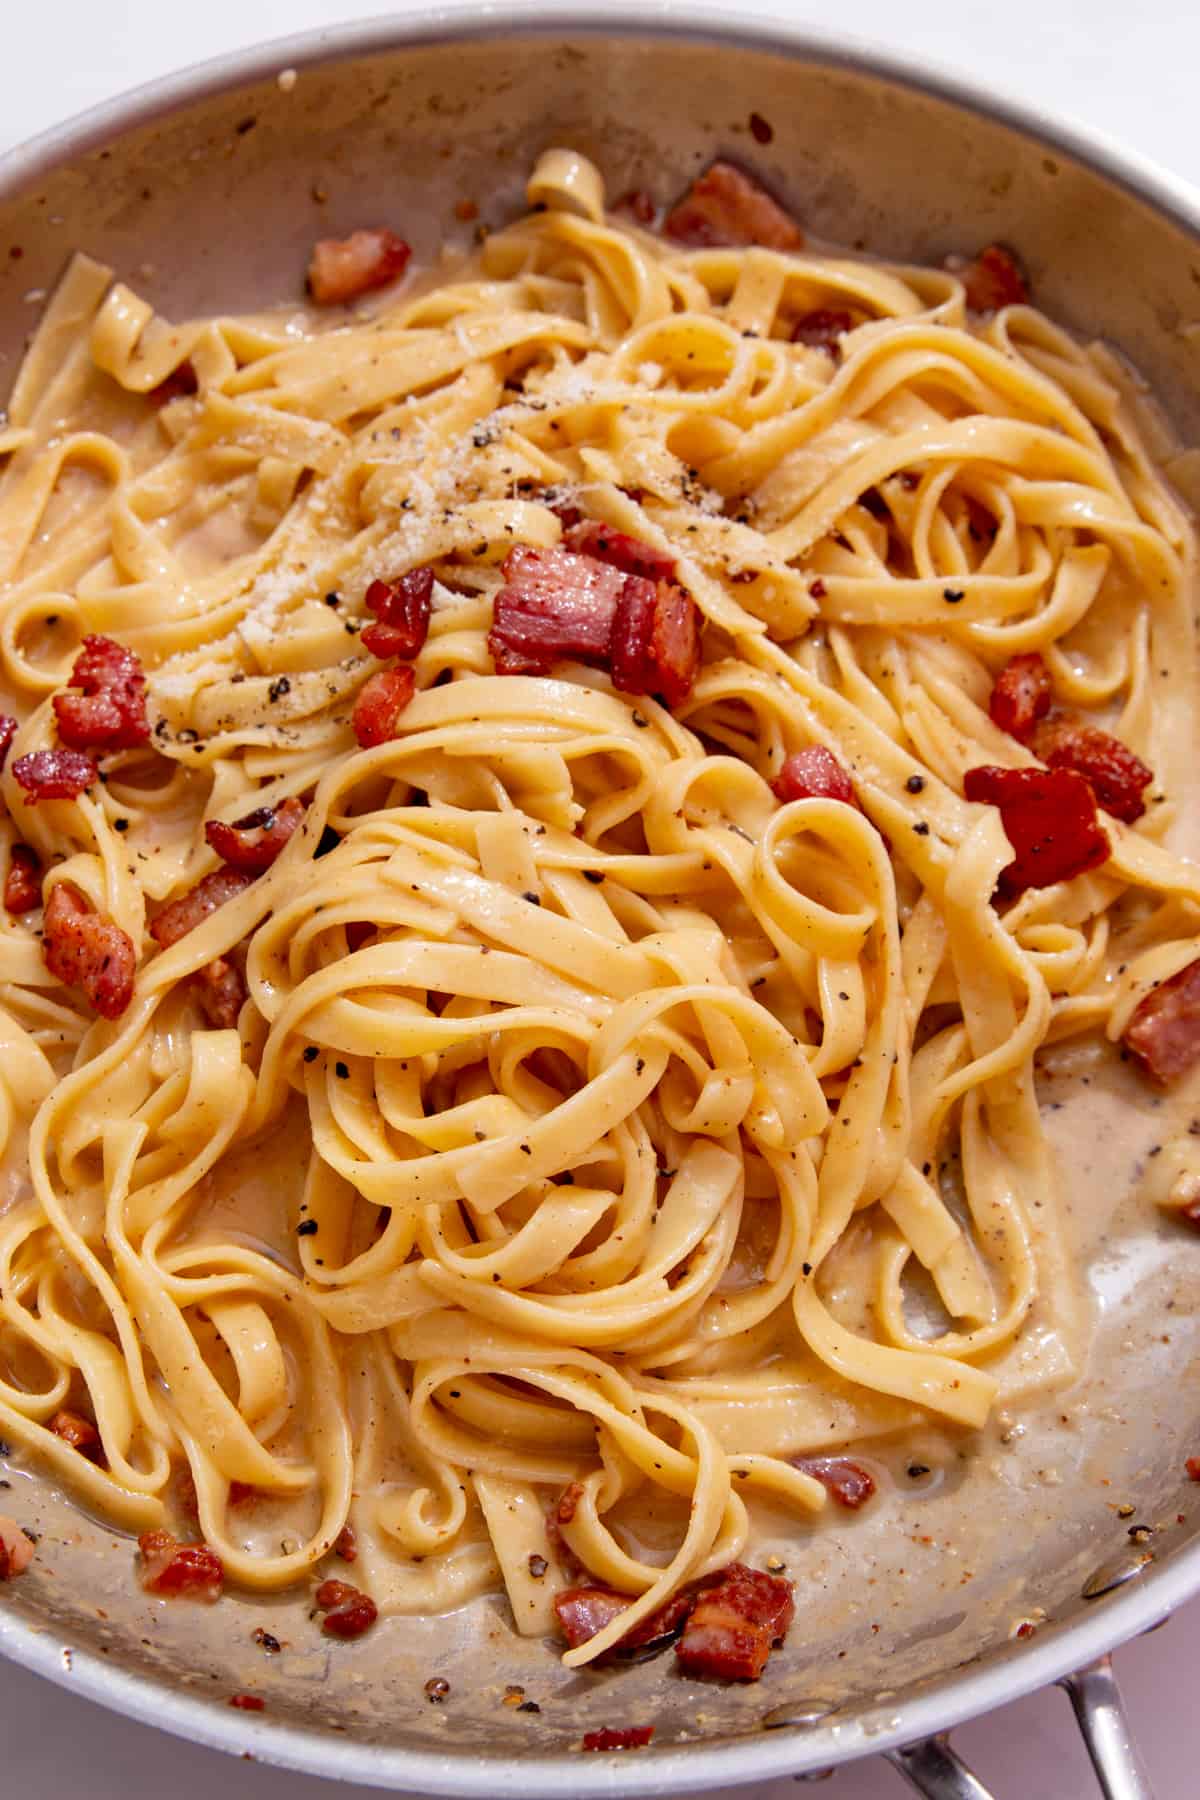 Tagliatelle in a large stainless steel pan with pancetta and parmesan topping.